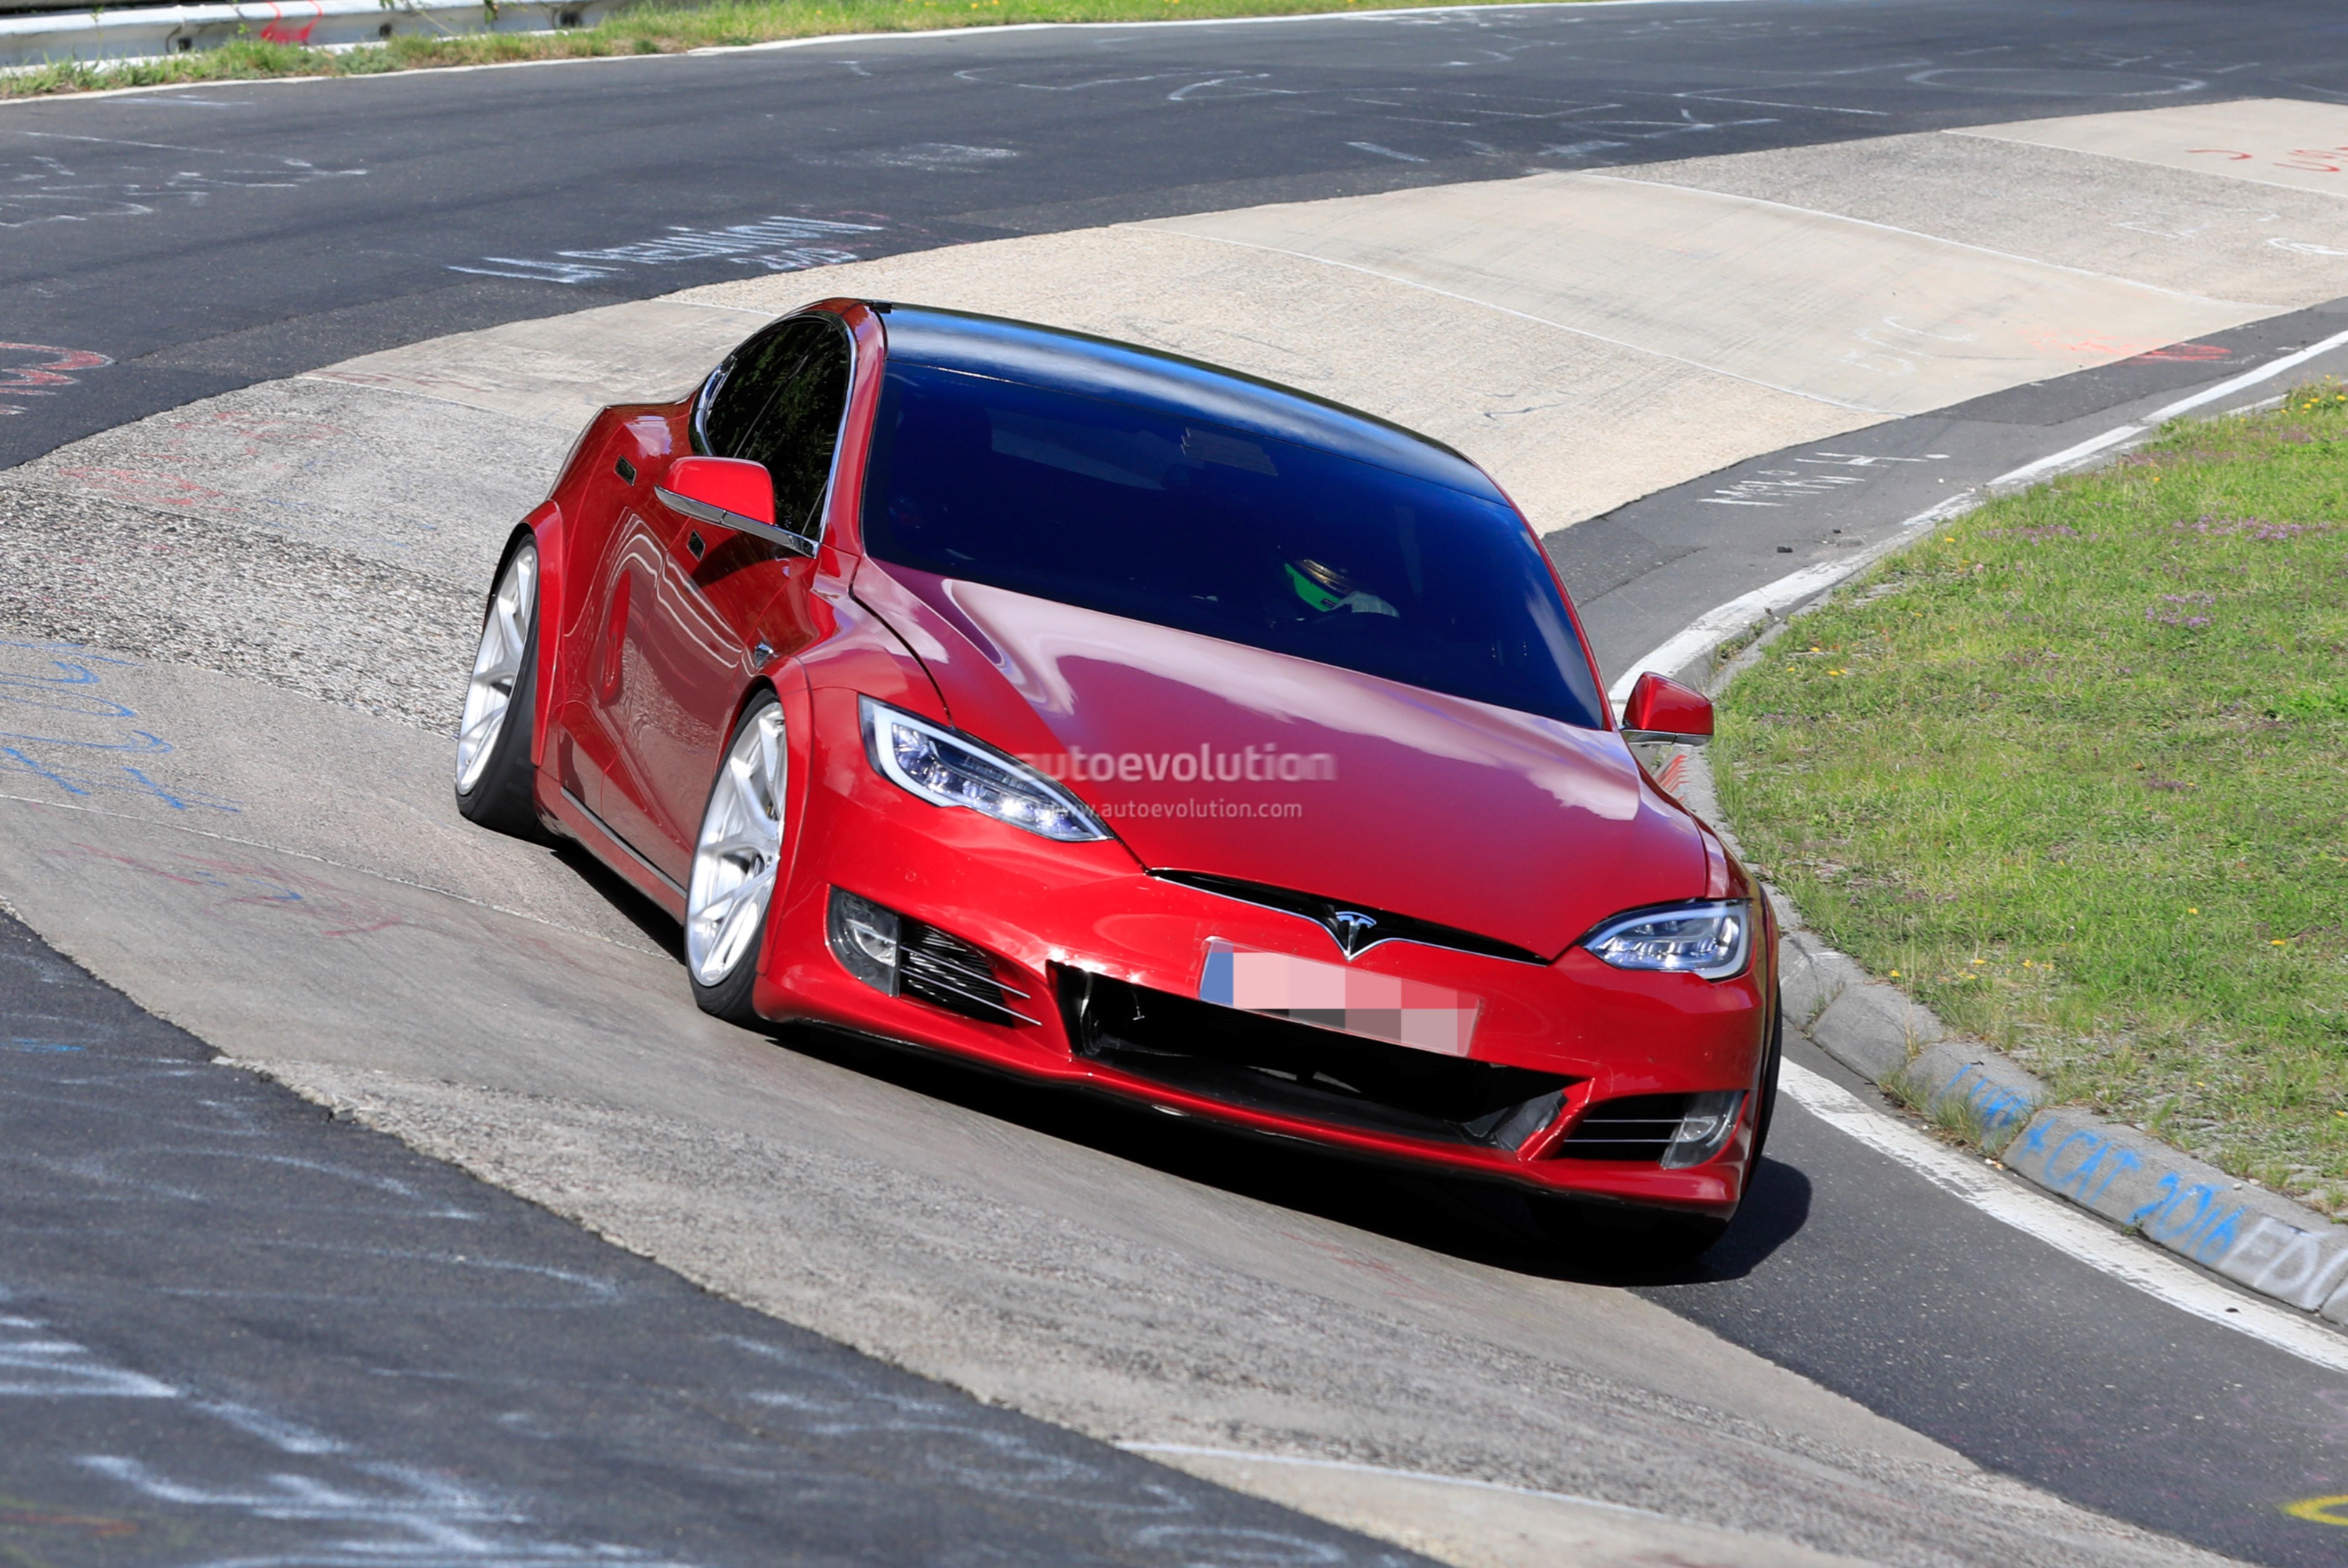 seven seater 2020 tesla model s spied at the nurburgring dropping hot laps